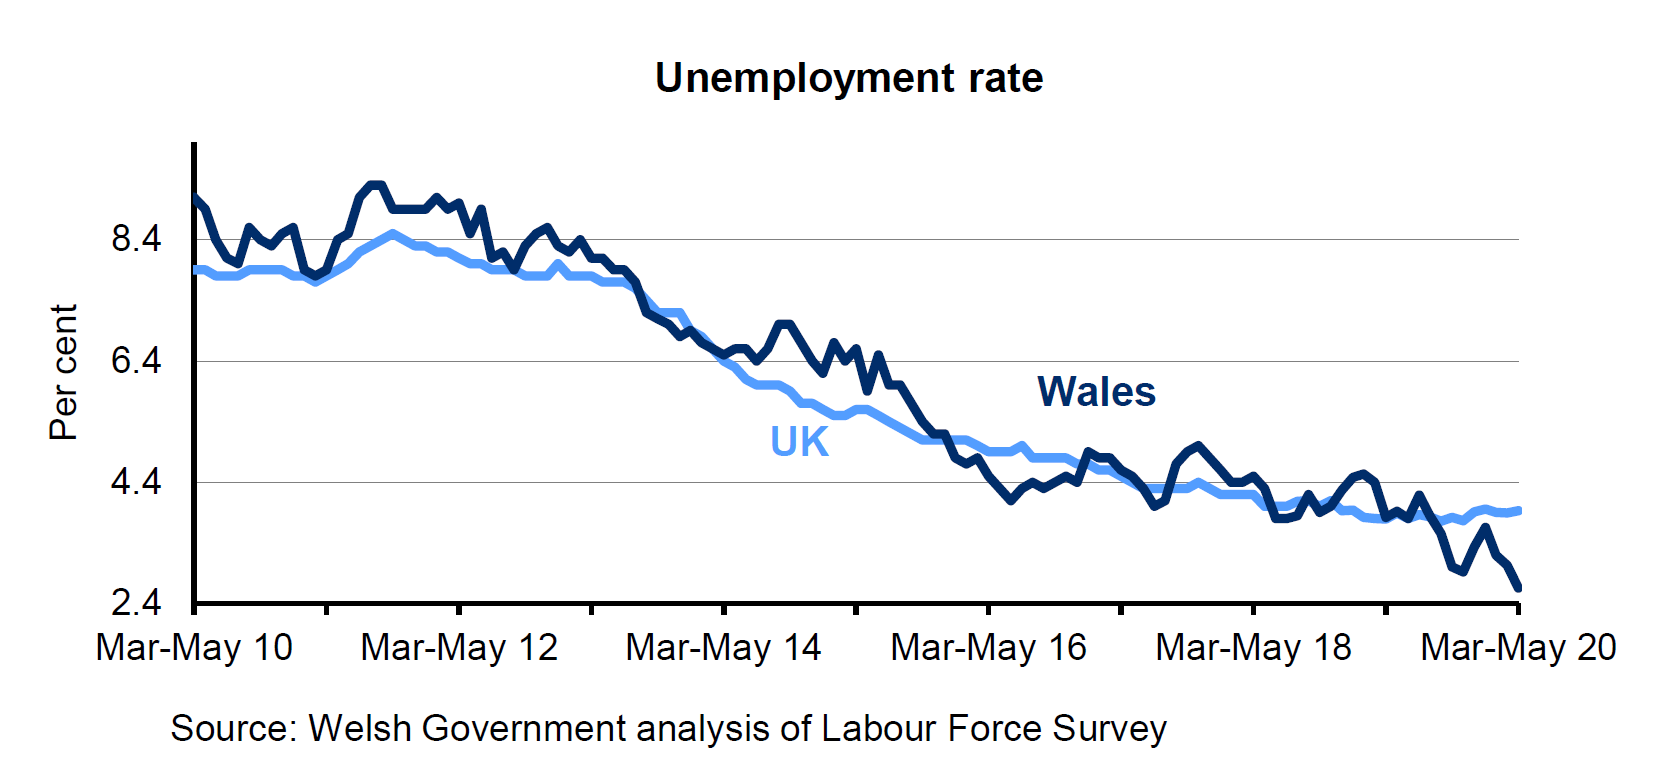 Chart showing the percentage of economically active people aged 16+ who are unemployed for Wales and the UK. The unemployment rate has decreased overall in both Wales and the UK over the last 4 years.